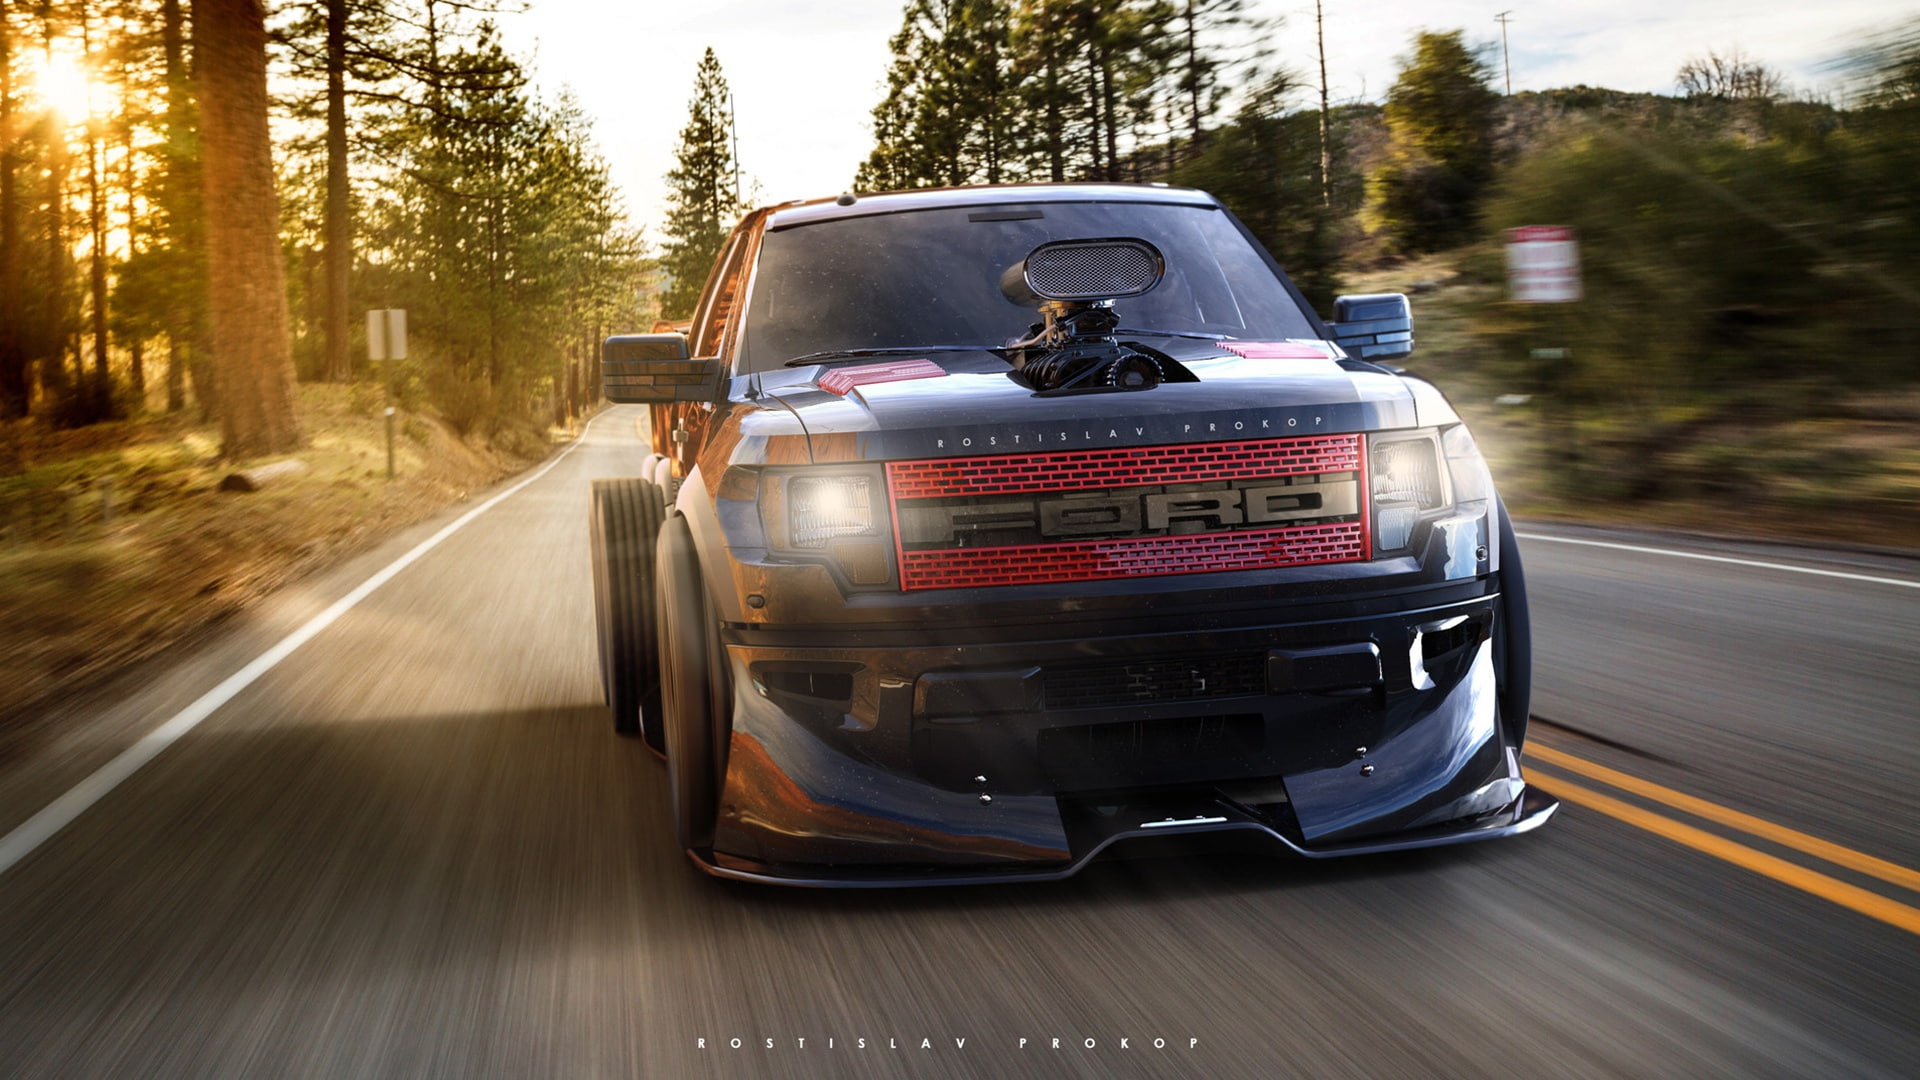 Auto, Machine, SUV, Rendering, F-150, The front, FORD, Rostislav Prokop